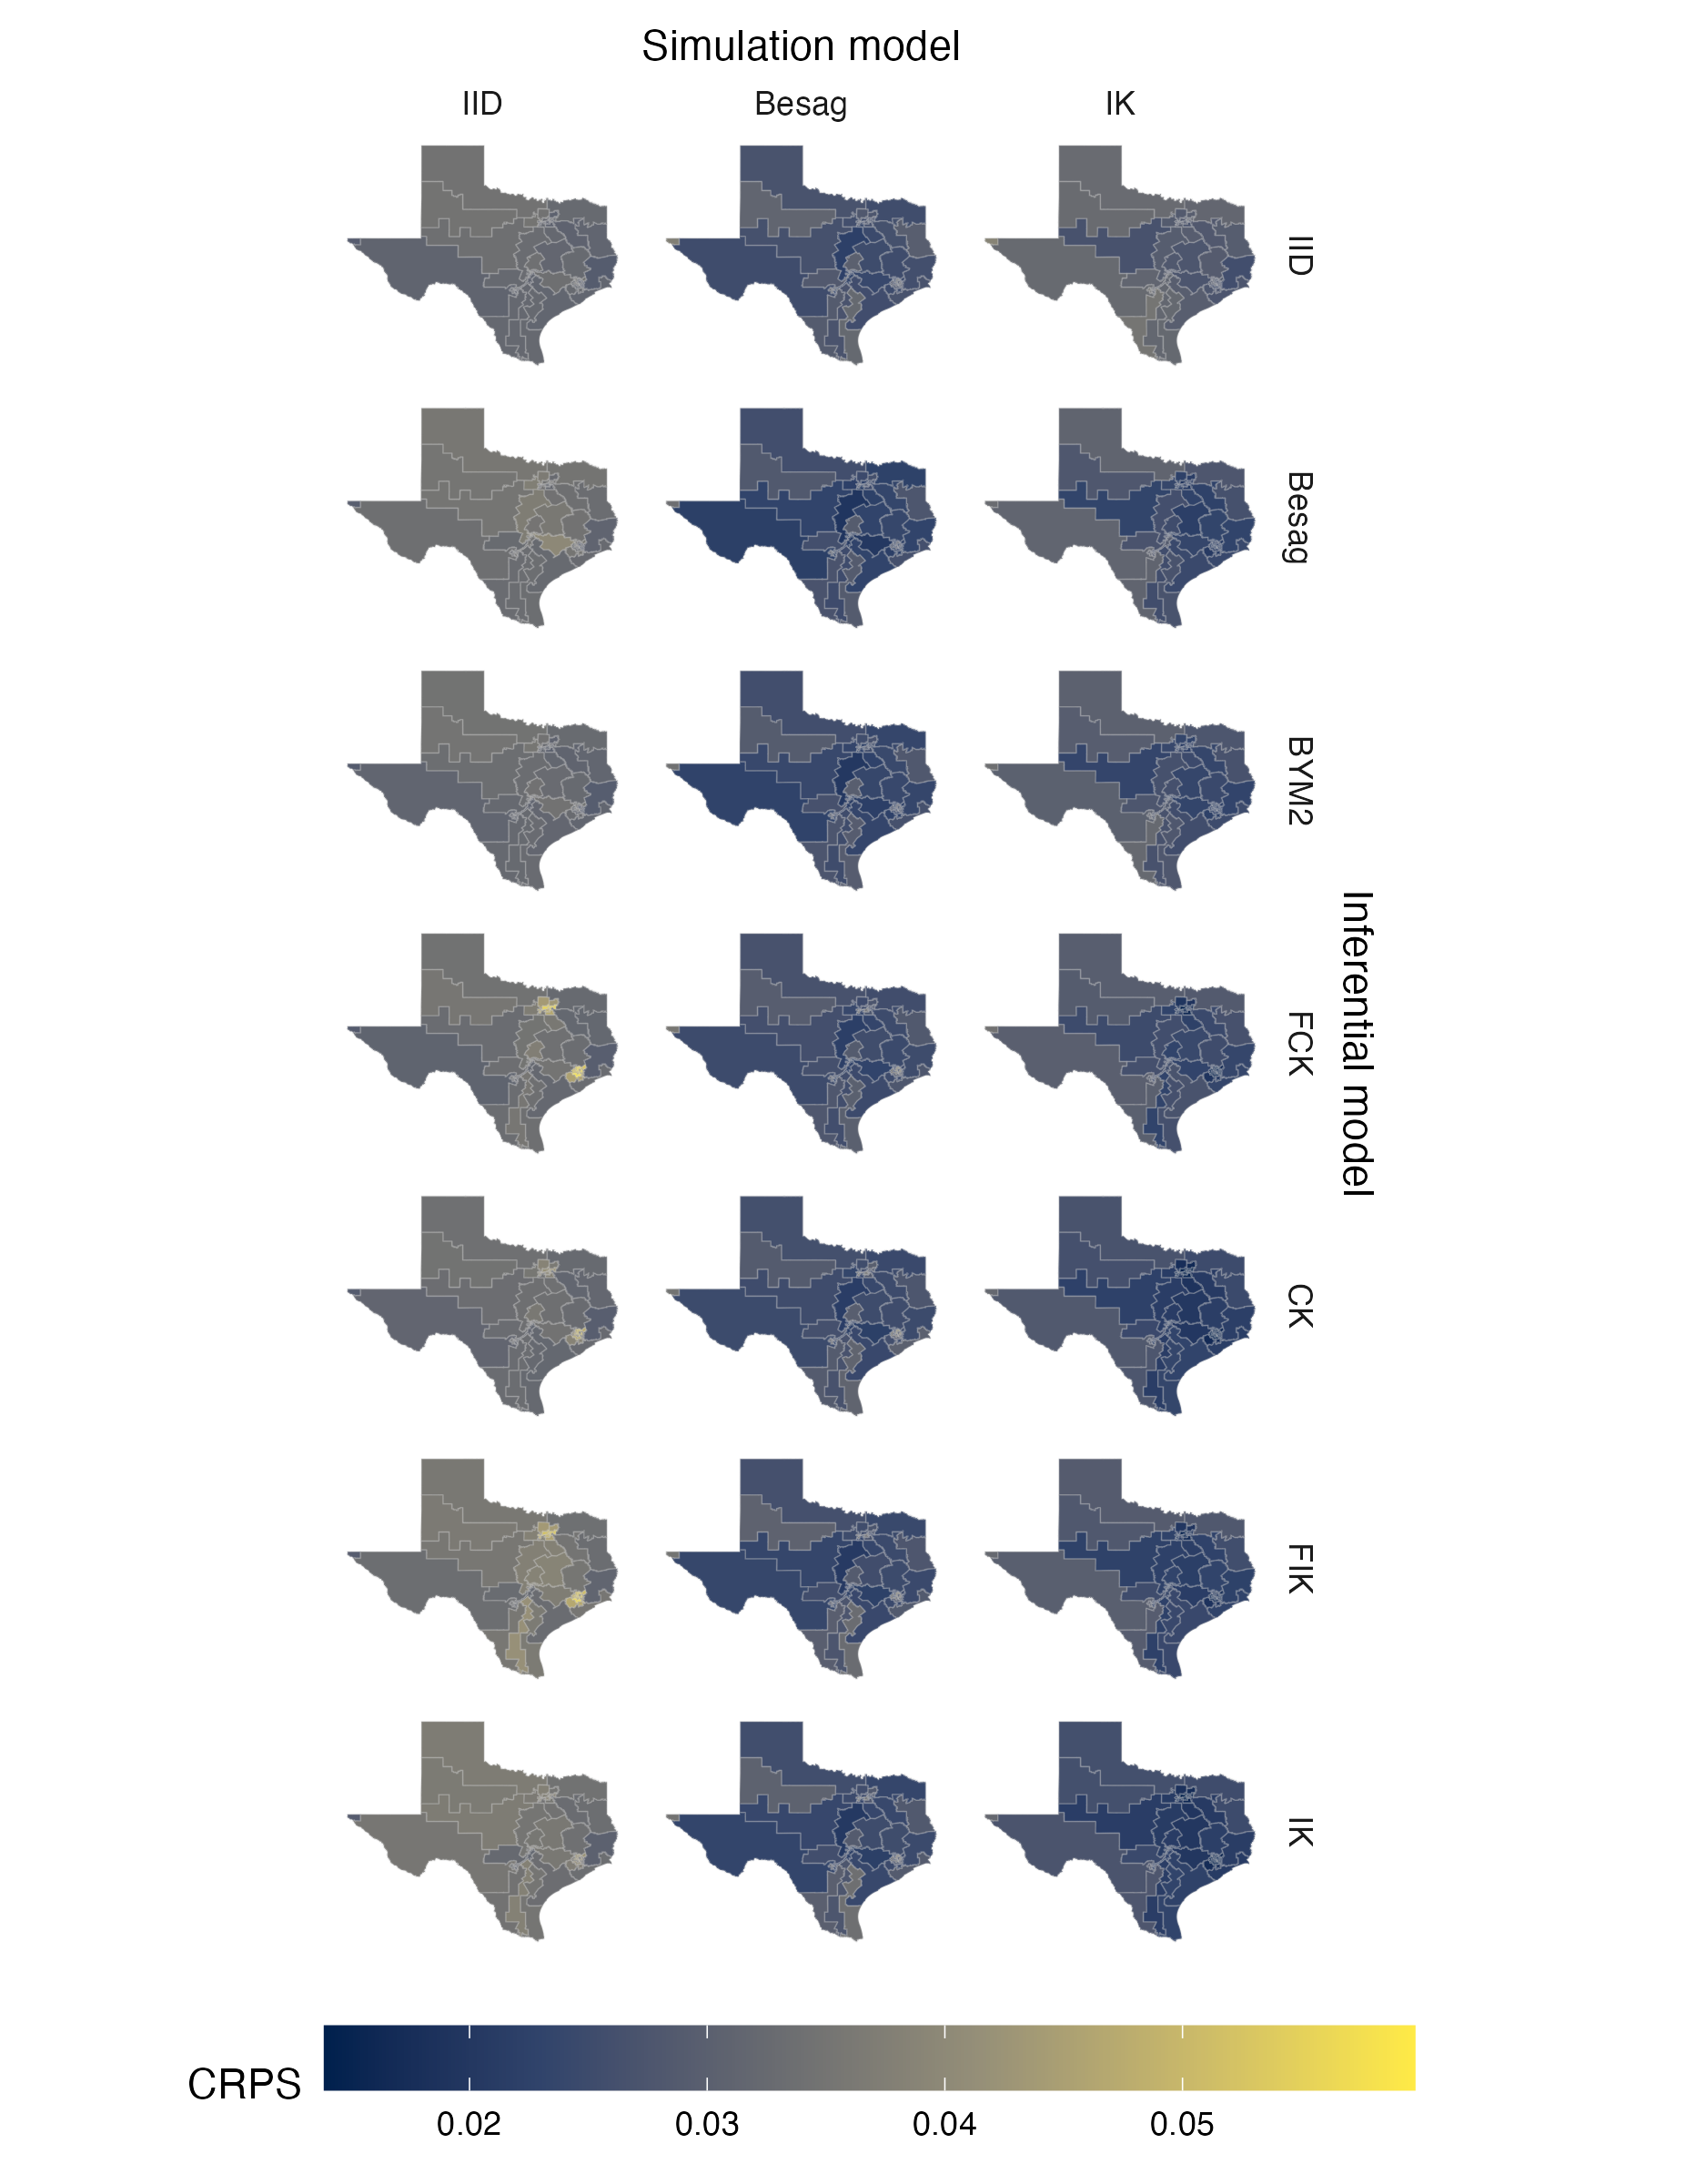 Choropleths showing the mean value of the CRPS in estimating \(\rho\), under each inferential model and simulation model, at each area of the Texas geometry (Panel 4.6G).